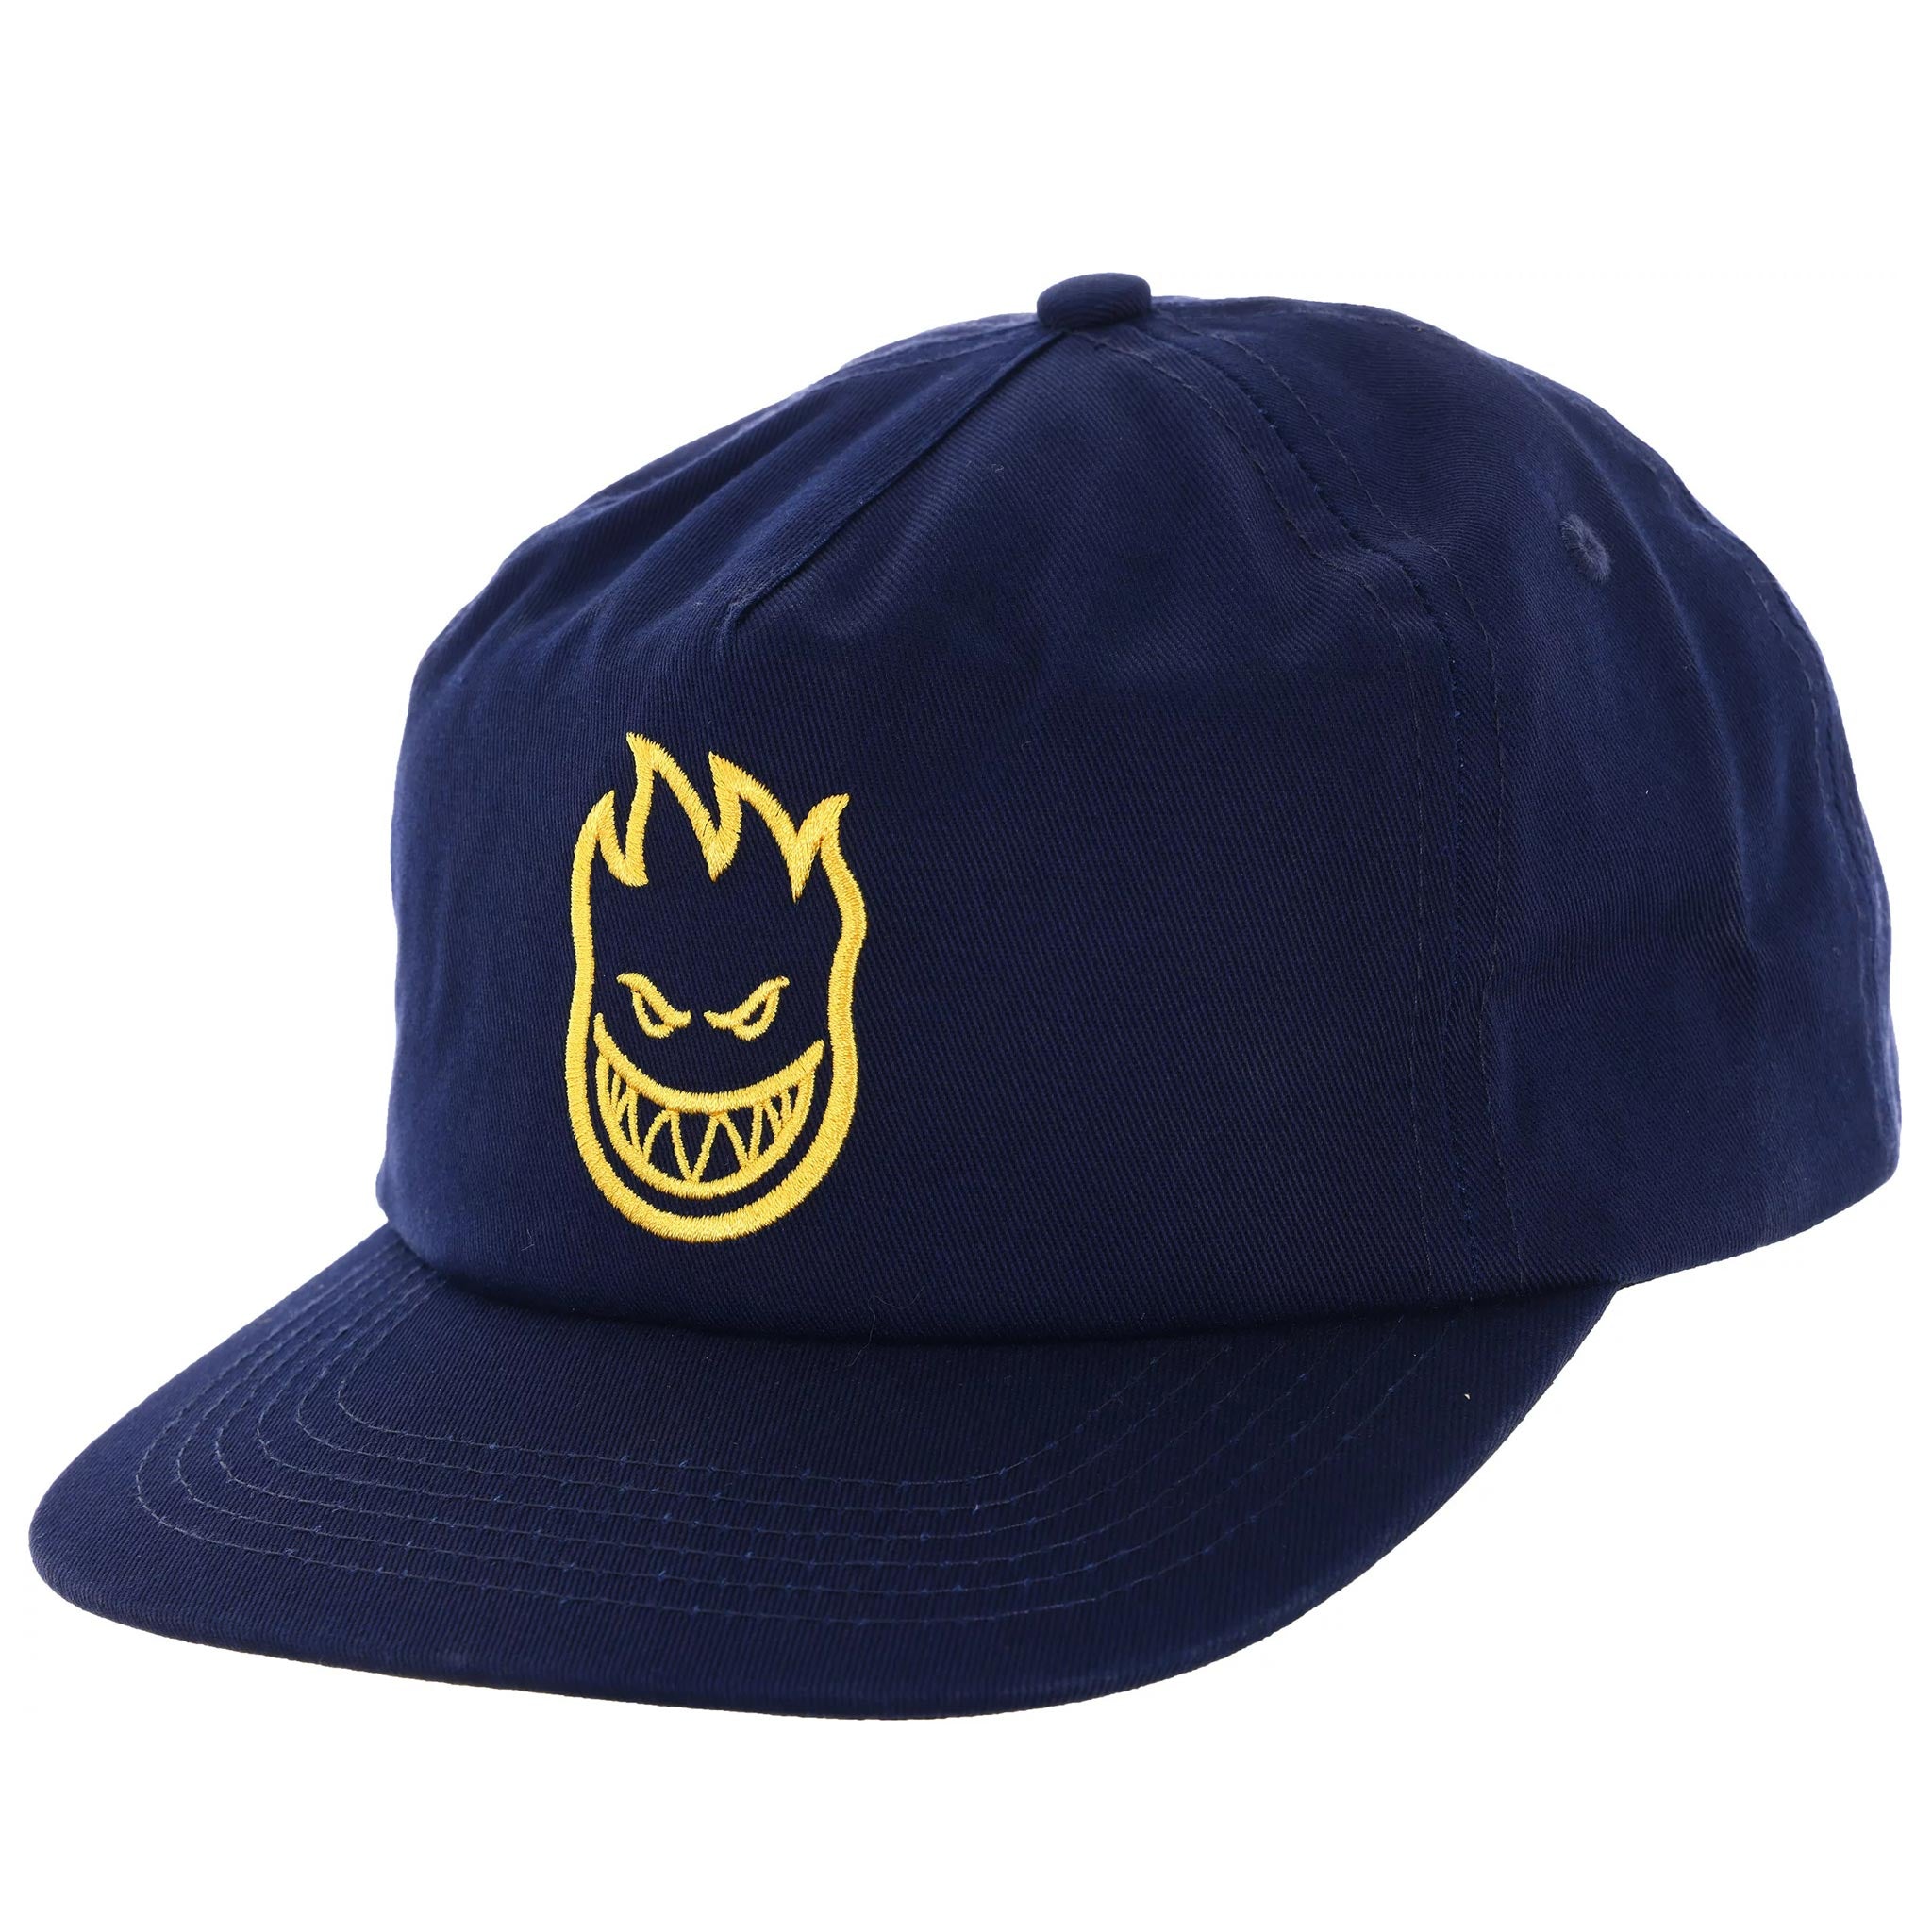 SPITFIRE BIGHEAD UNSTRUCTURED SNAPBACK HAT NAVY / YELLOW 